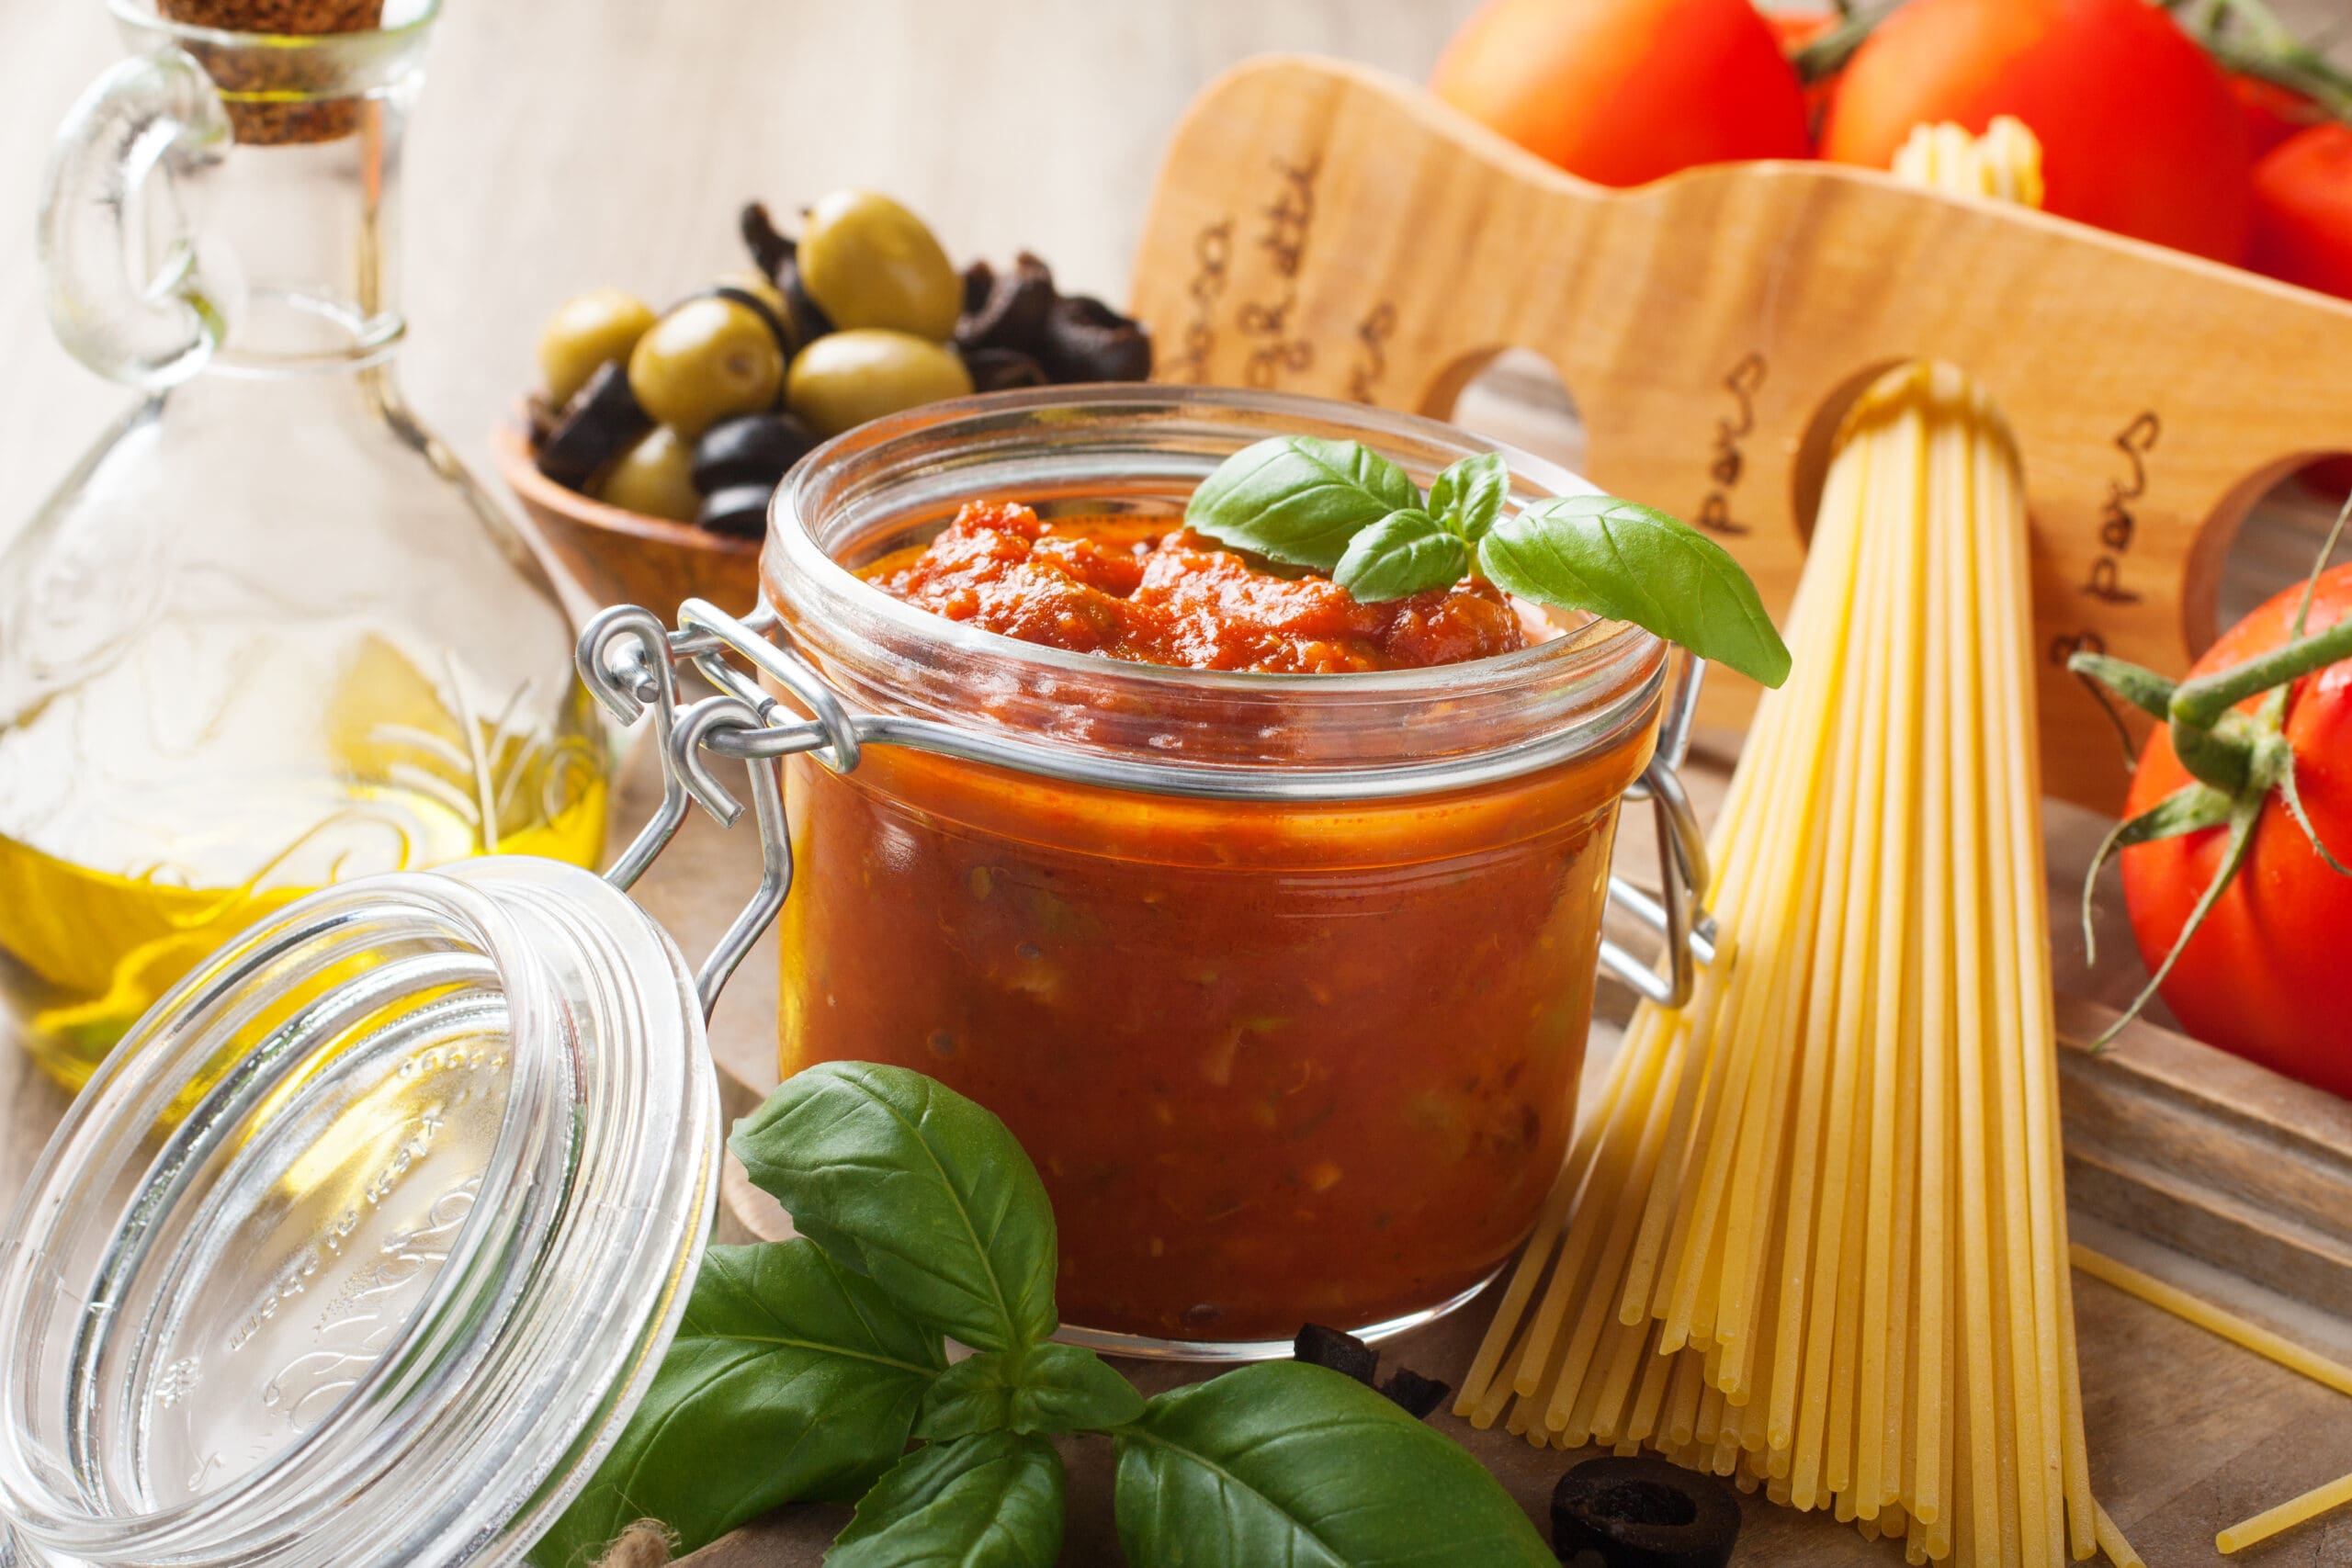 Ingredients For Spaghetti With Tomato Sauce